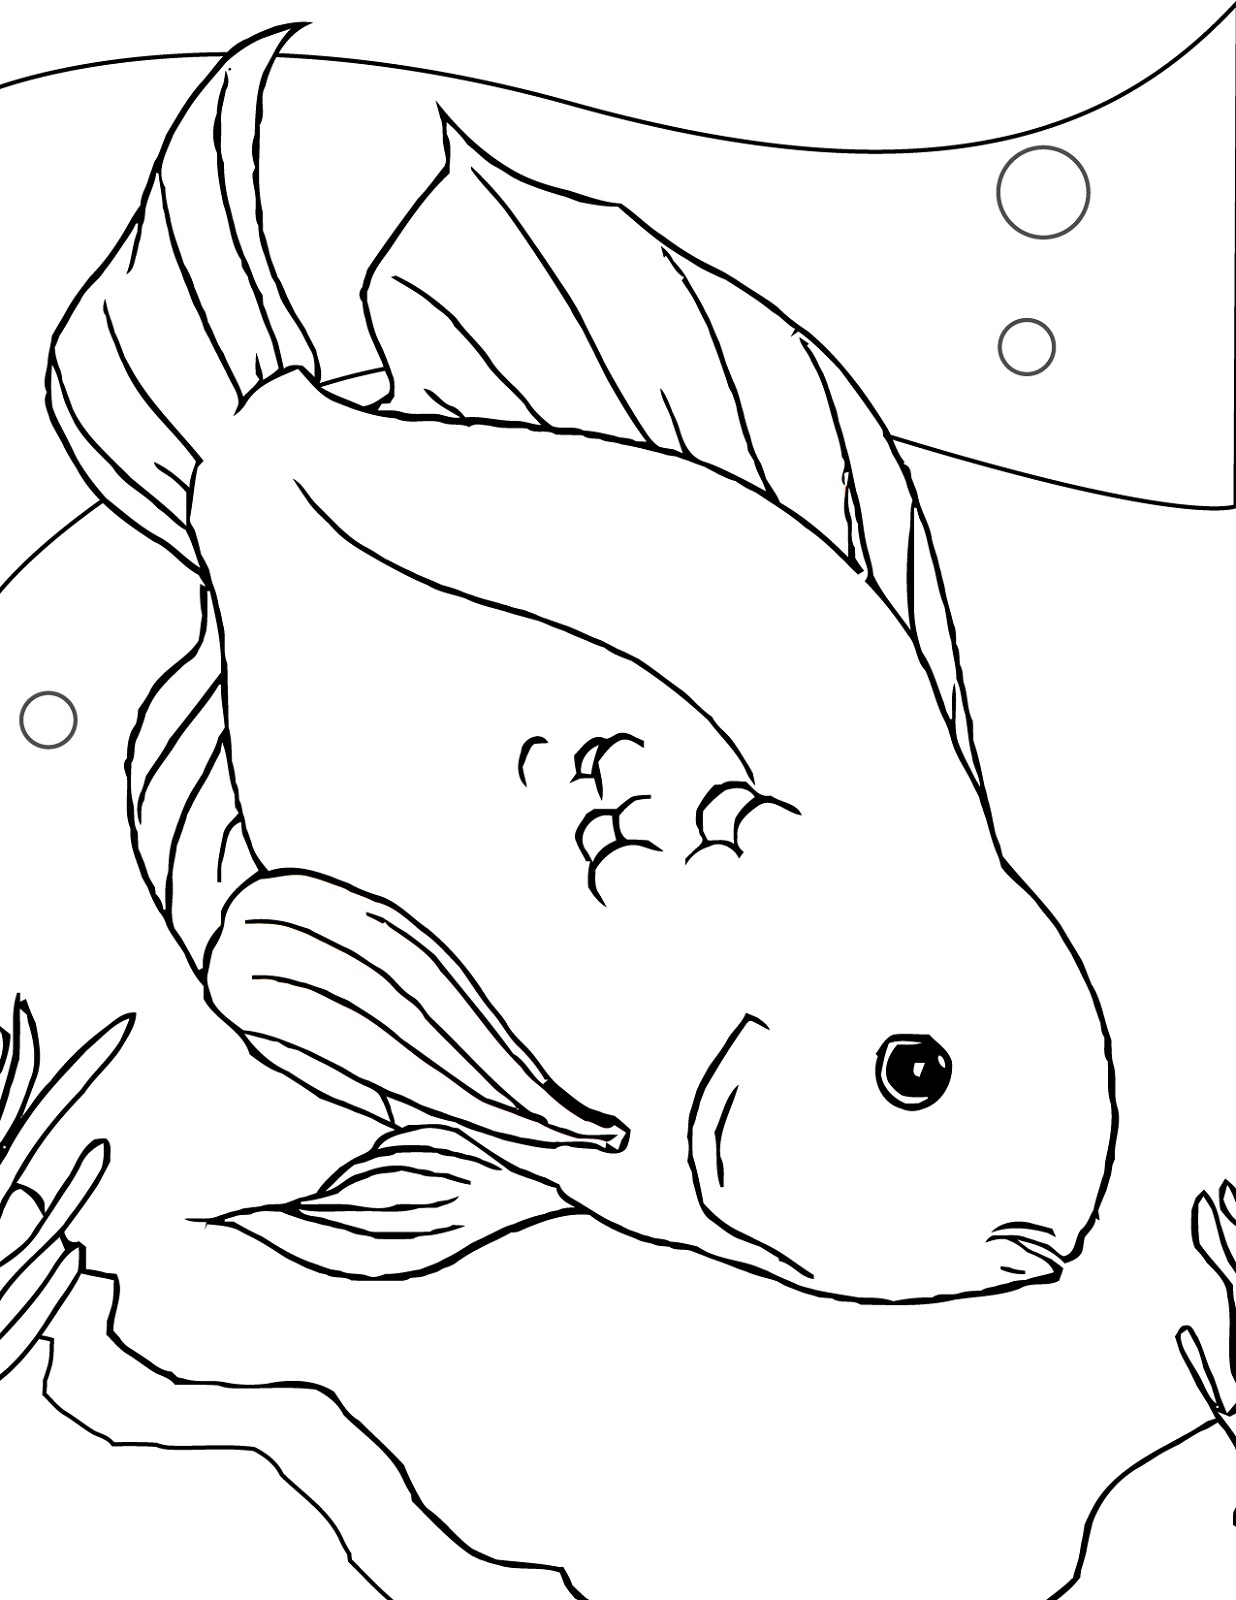 la state freshwater fish coloring pages - photo #29